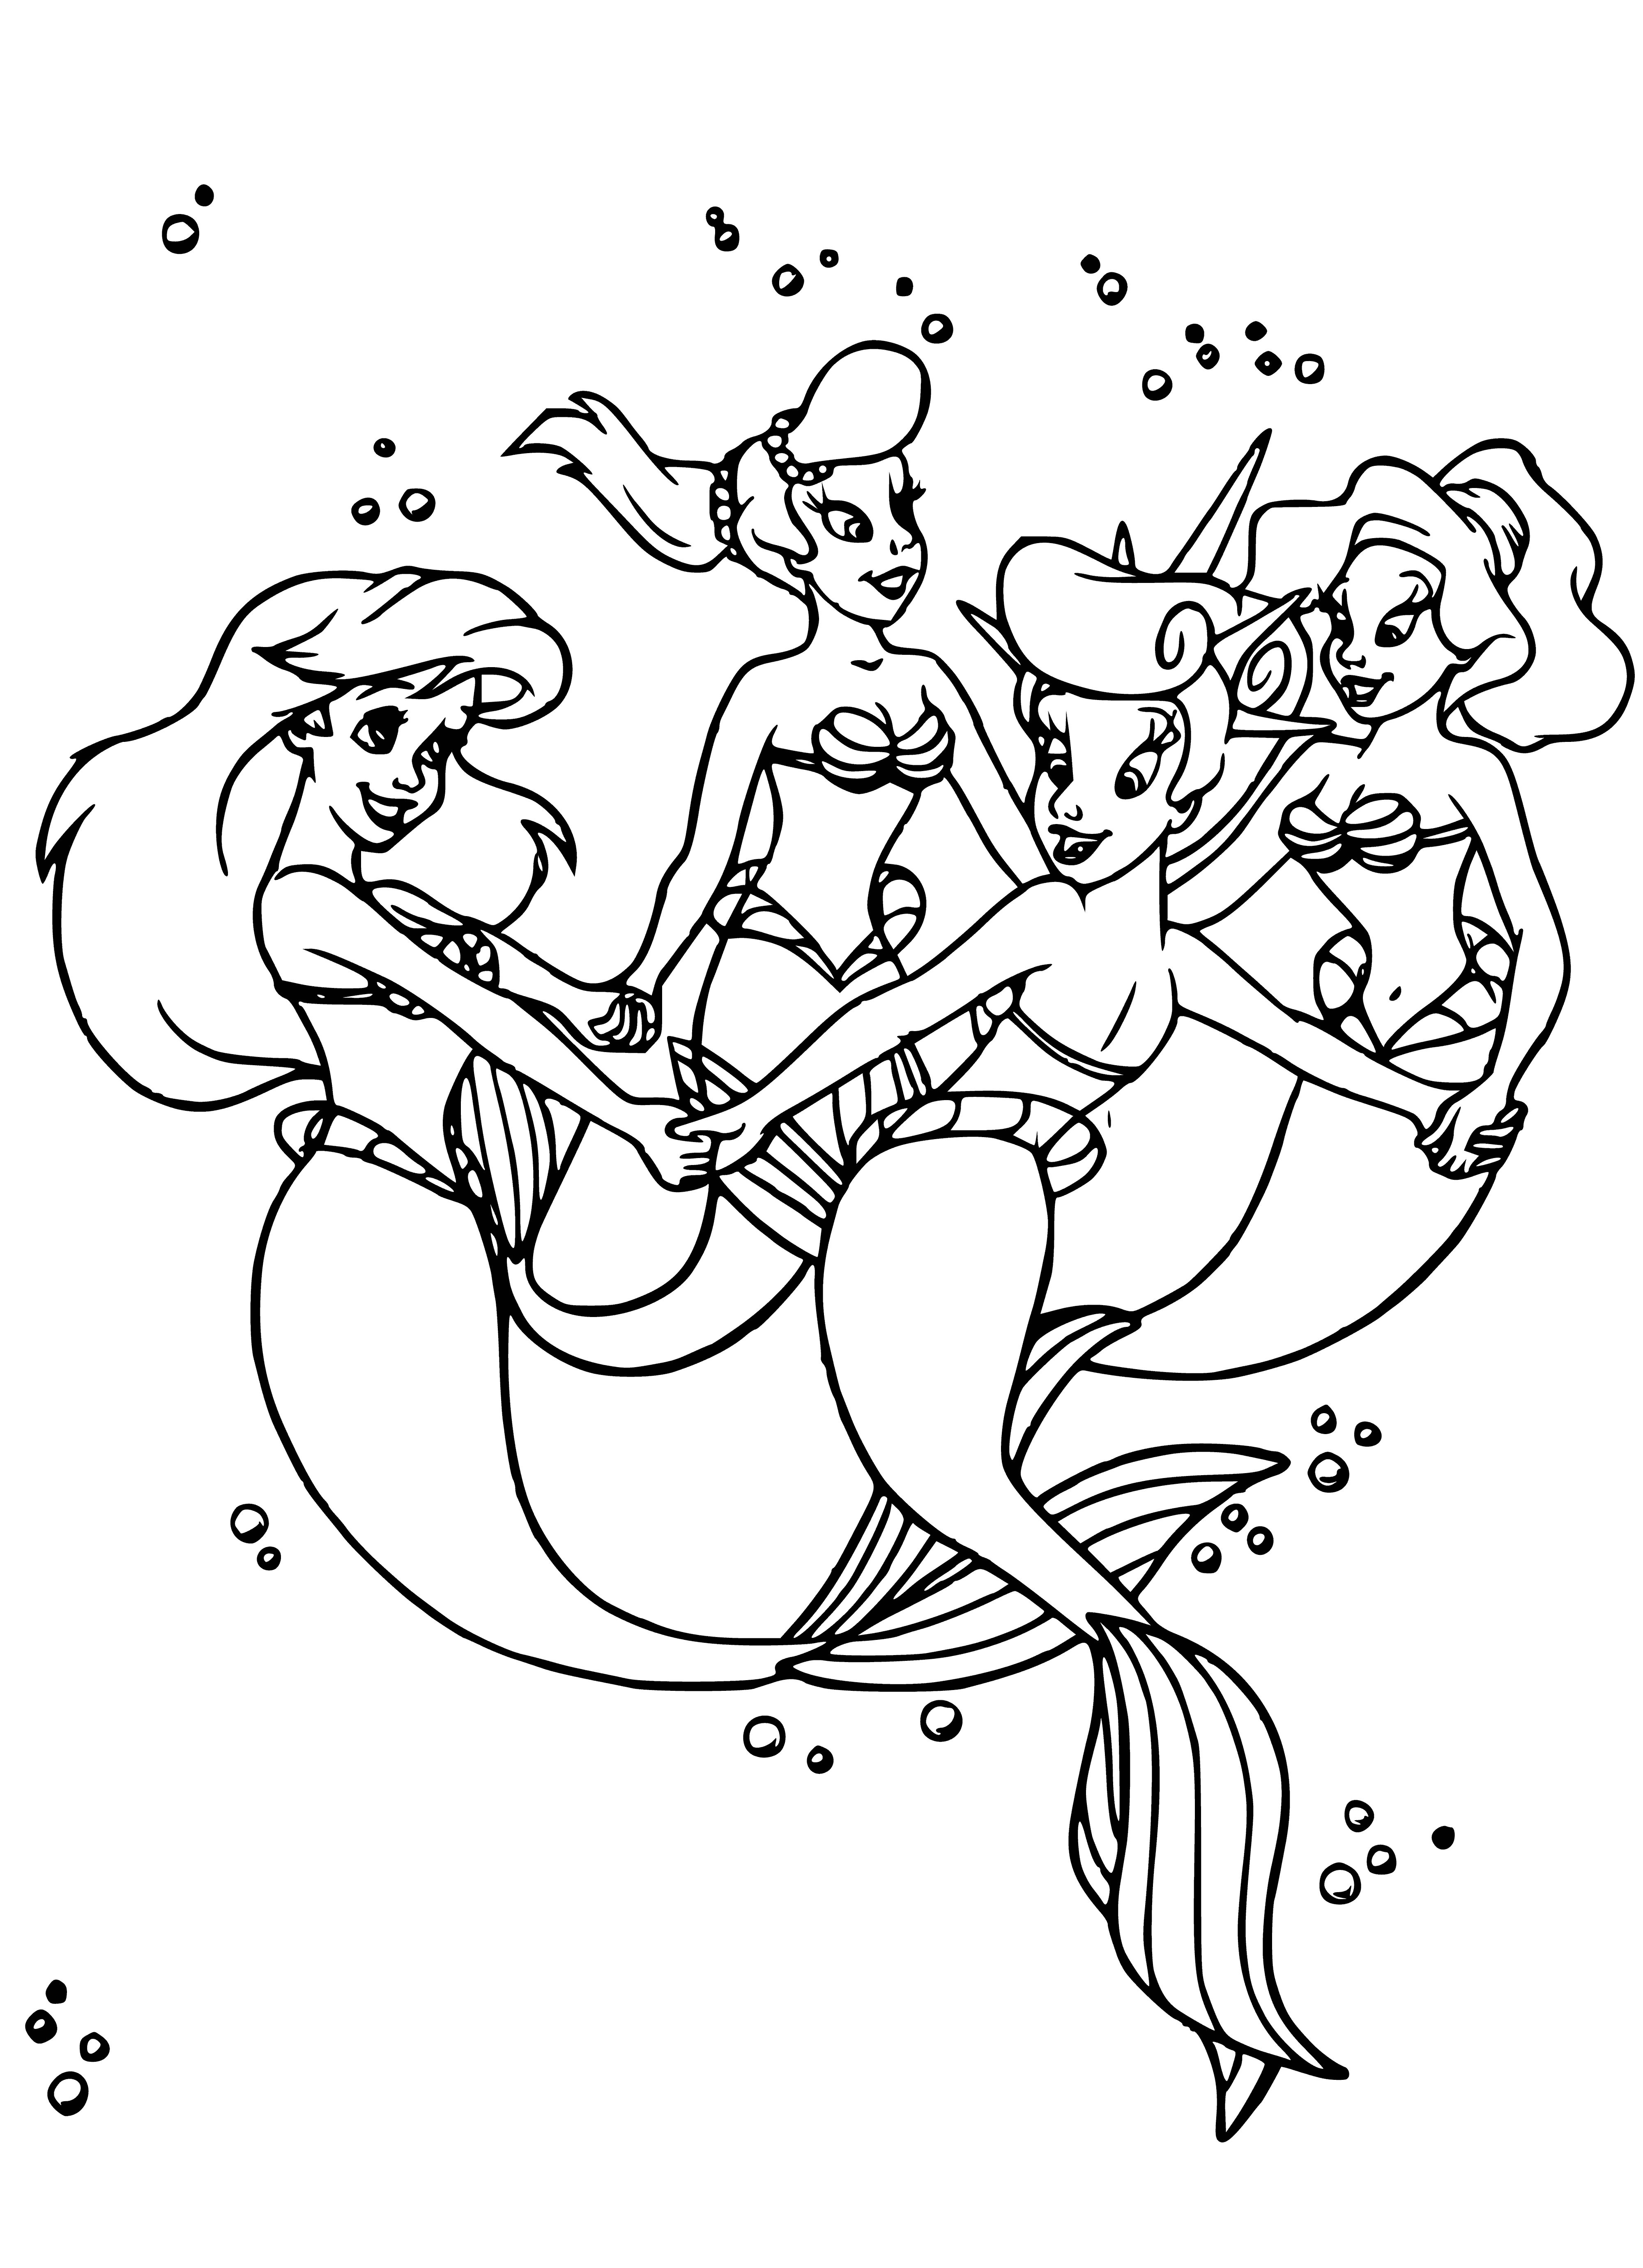 coloring page: 3 women, each w/diff. hues of hair, fins for legs, holding hands, smiling & happy.